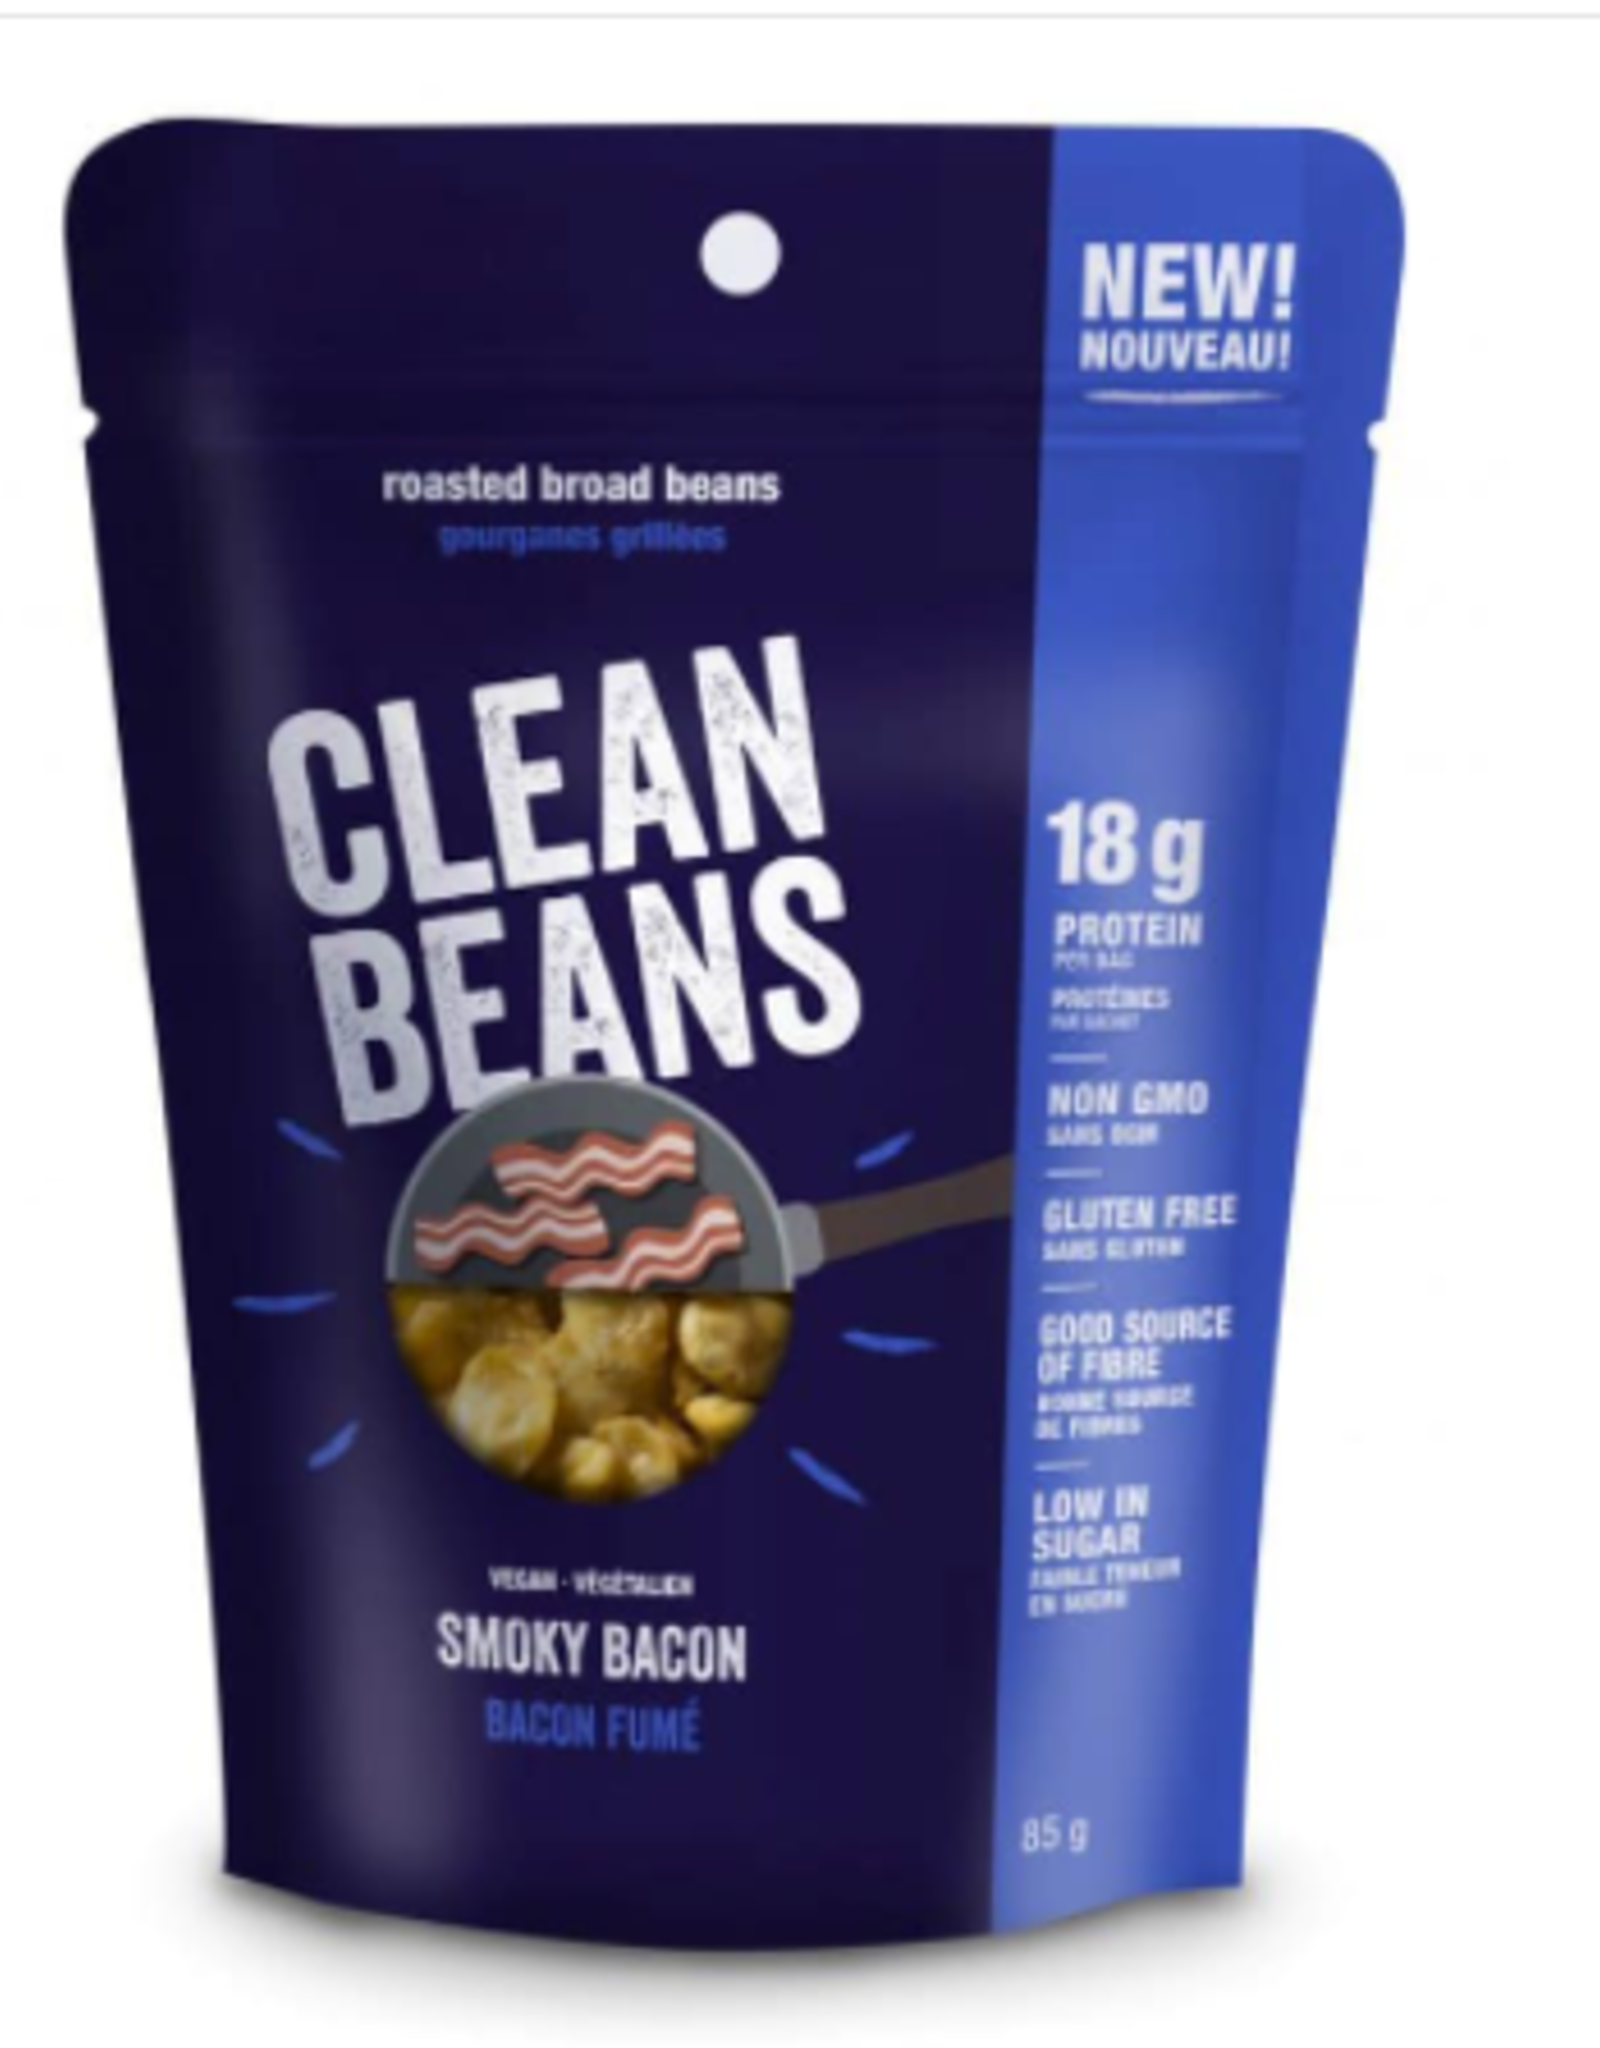 Clean Bean Clean Beans-Roasted Broad Beans, Smoky Bacon, 85g